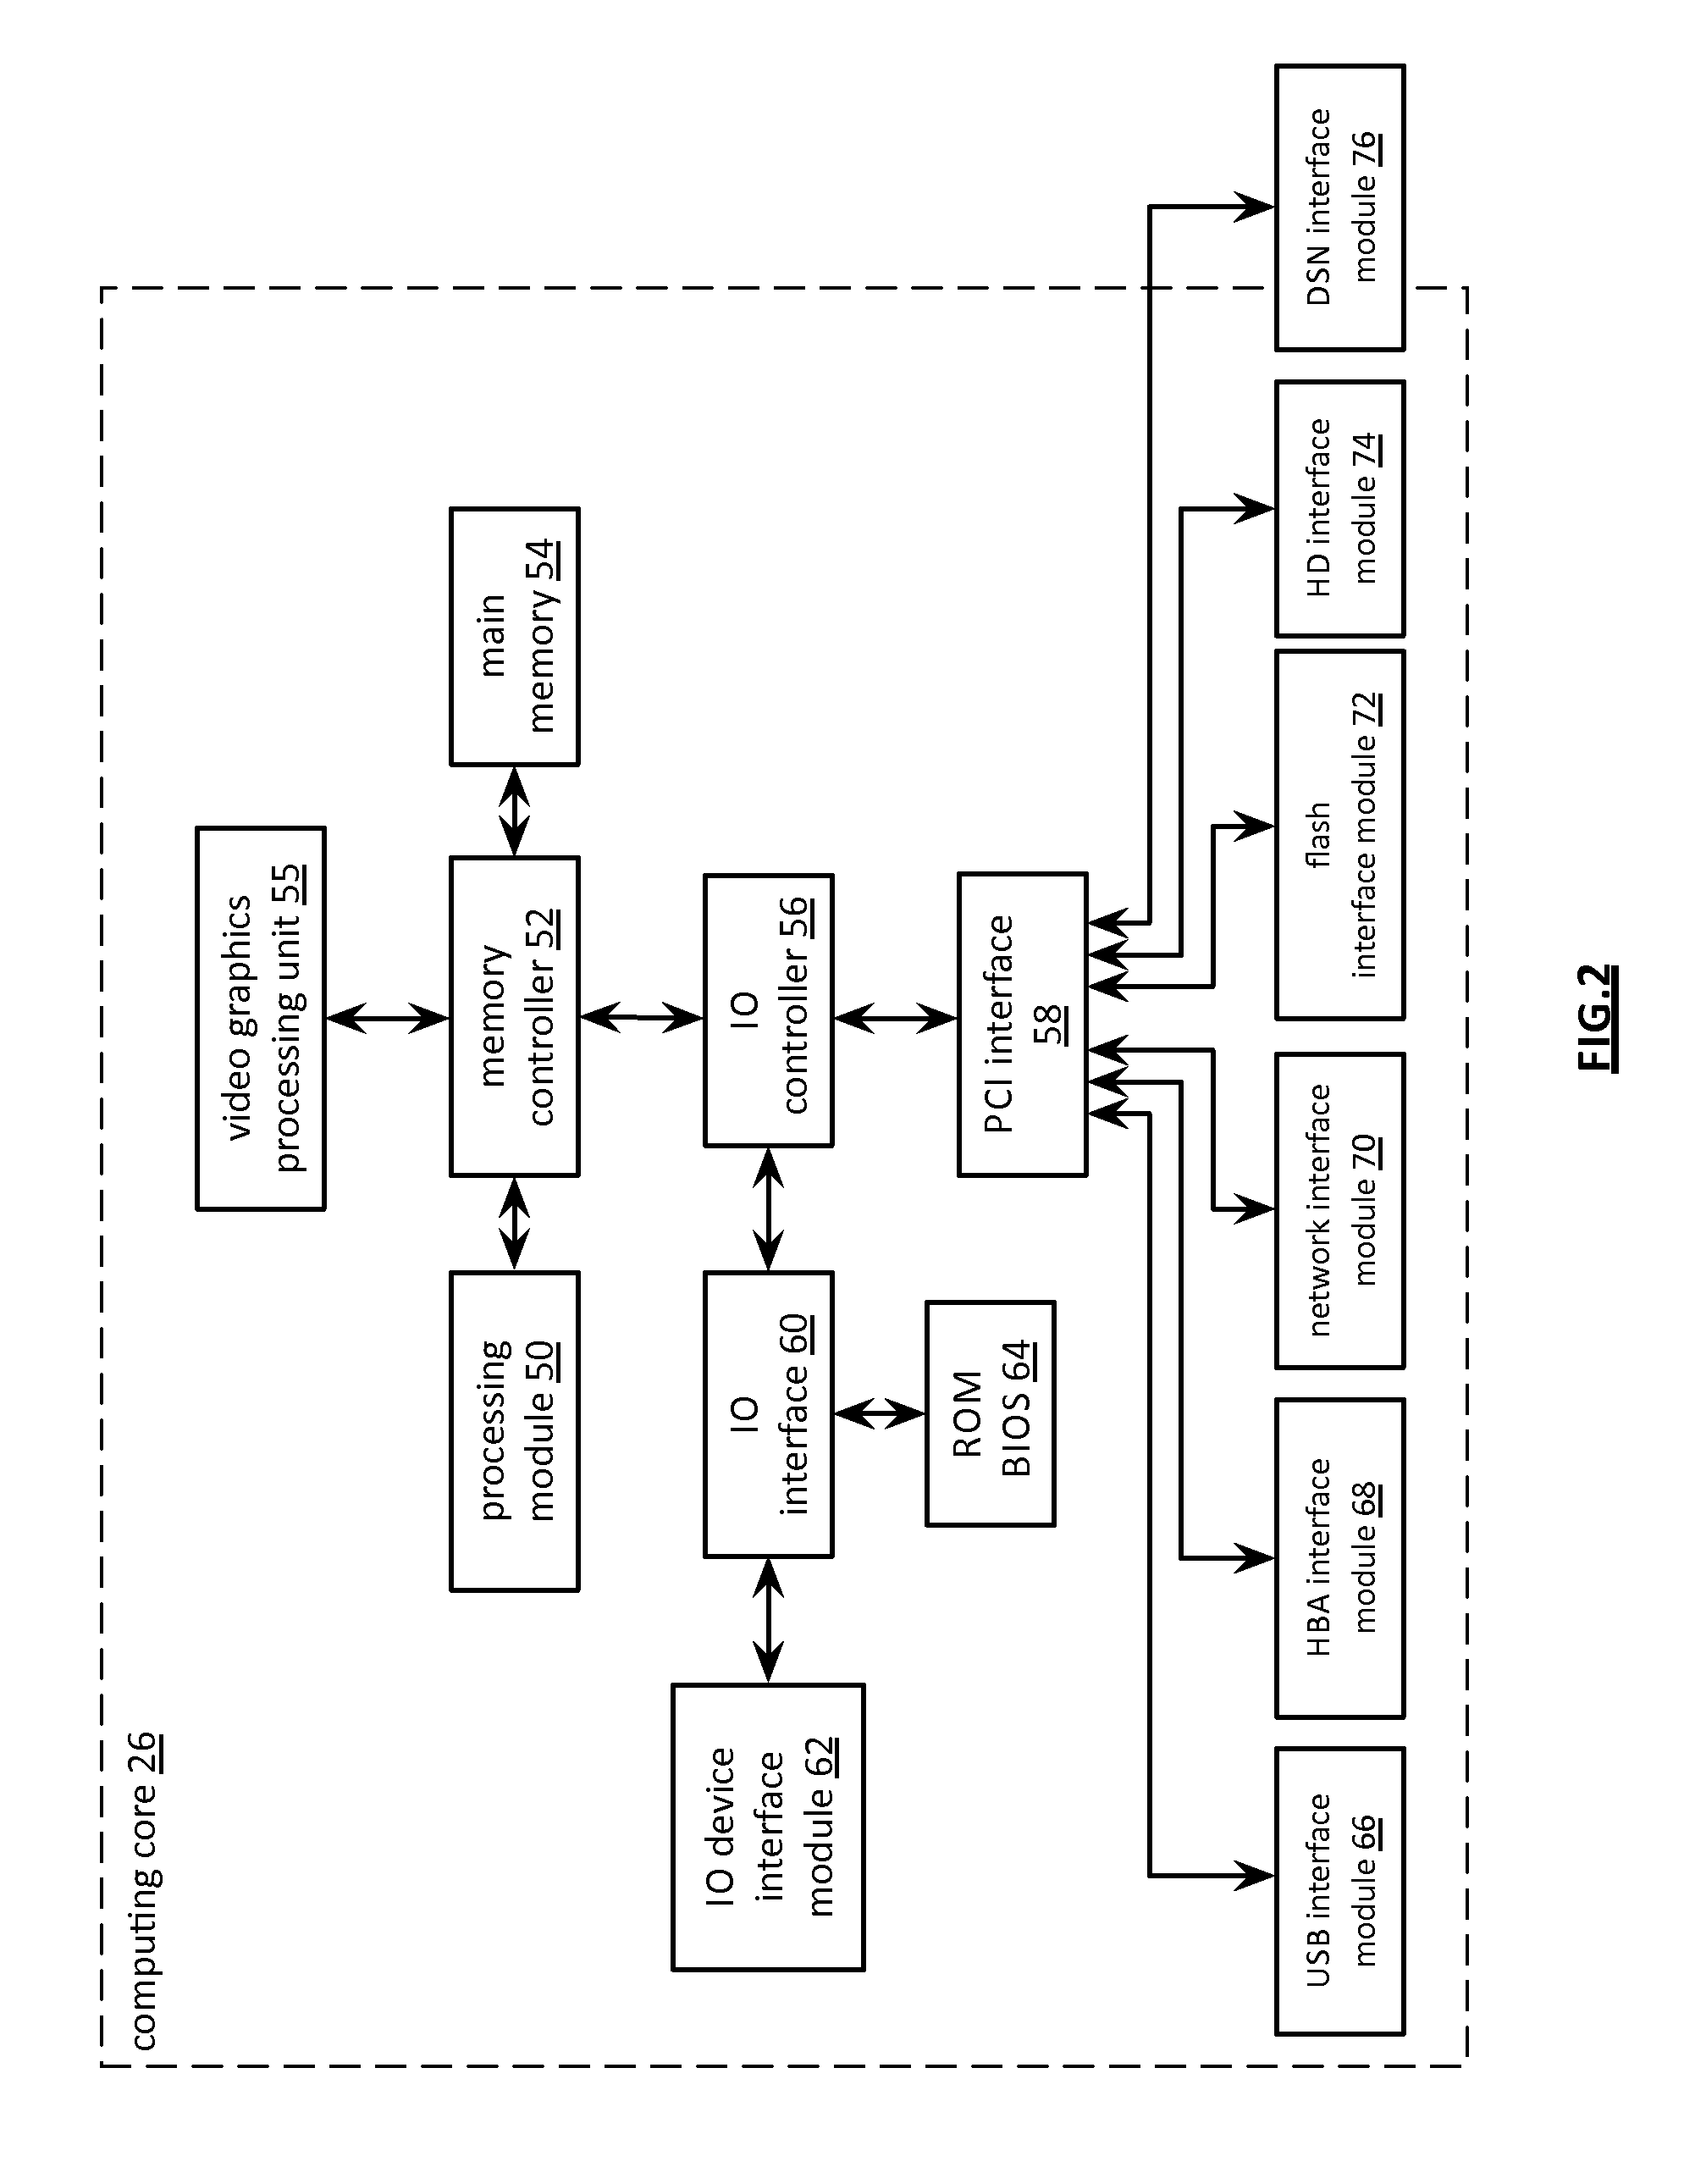 Storage and retrieval of dispersed storage network access information